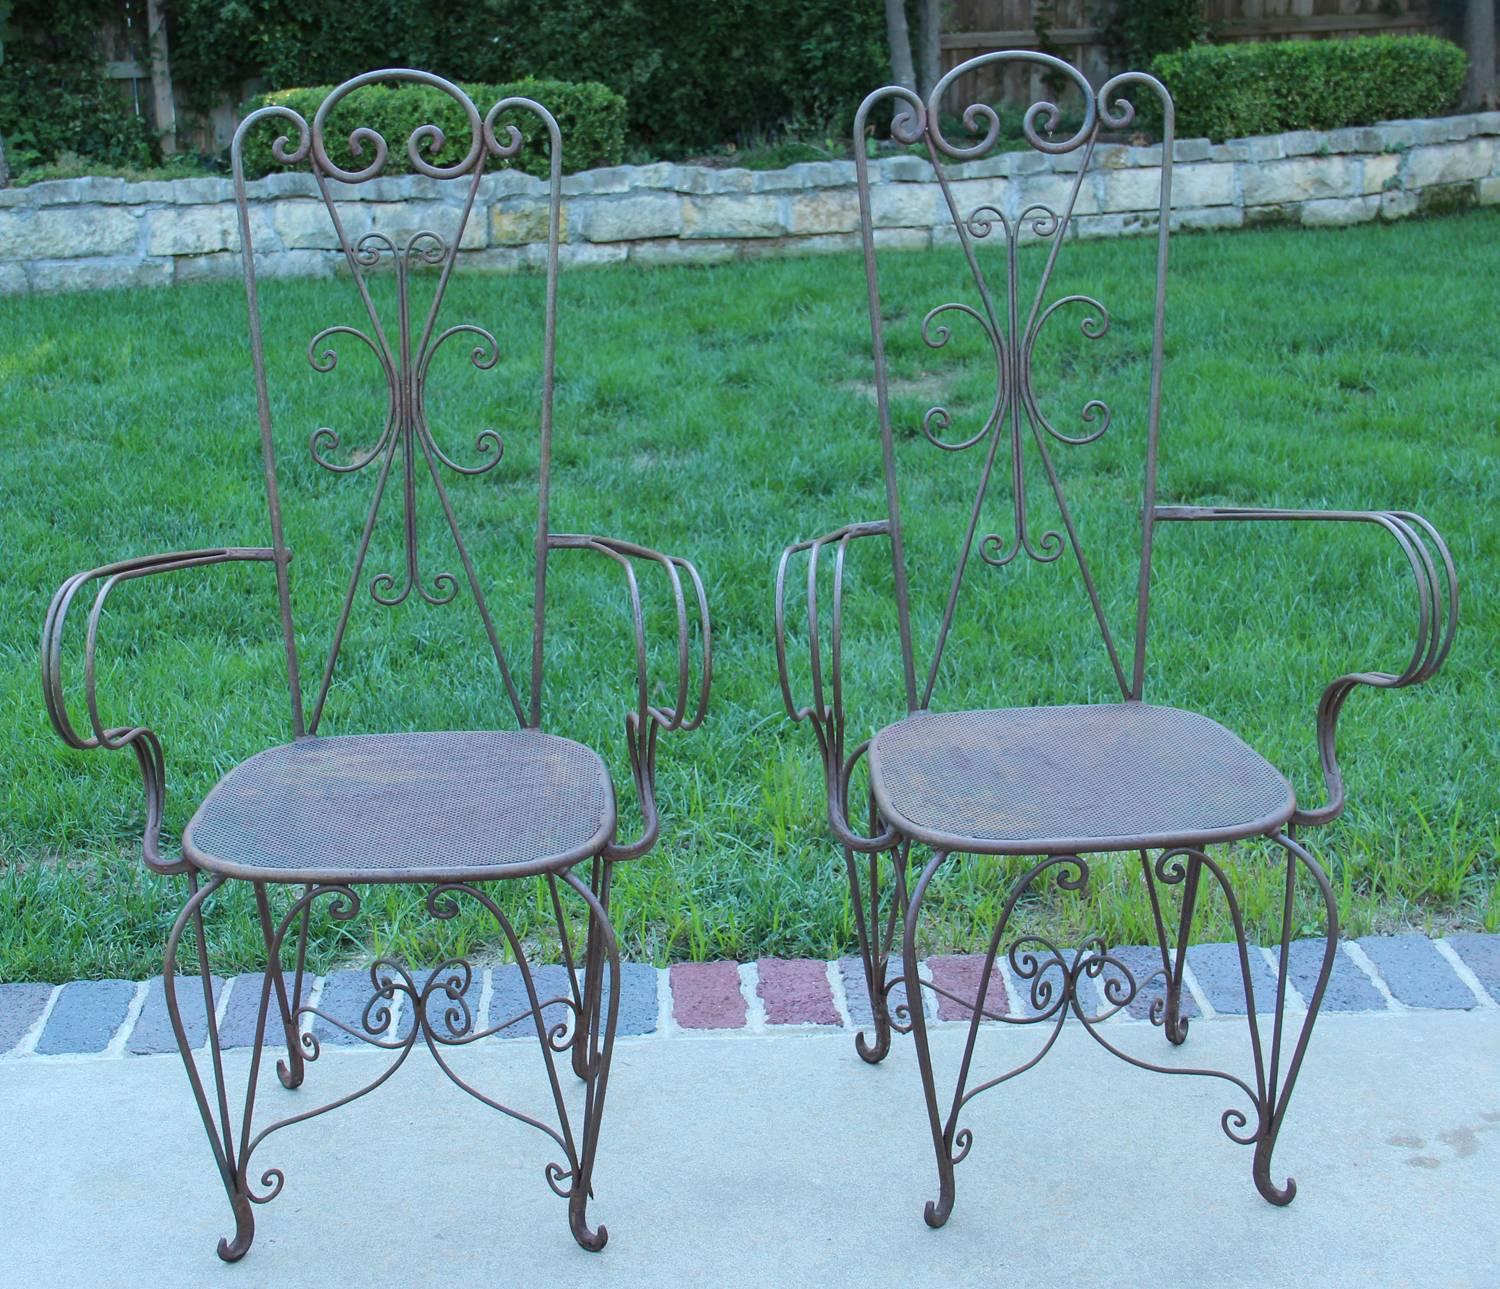 A charming pair of iron chairs with curlicue design on backs. The square seats have a mesh pattern and are raised on cabriole legs, ending in tiny scrolled feet. Found in Paris.